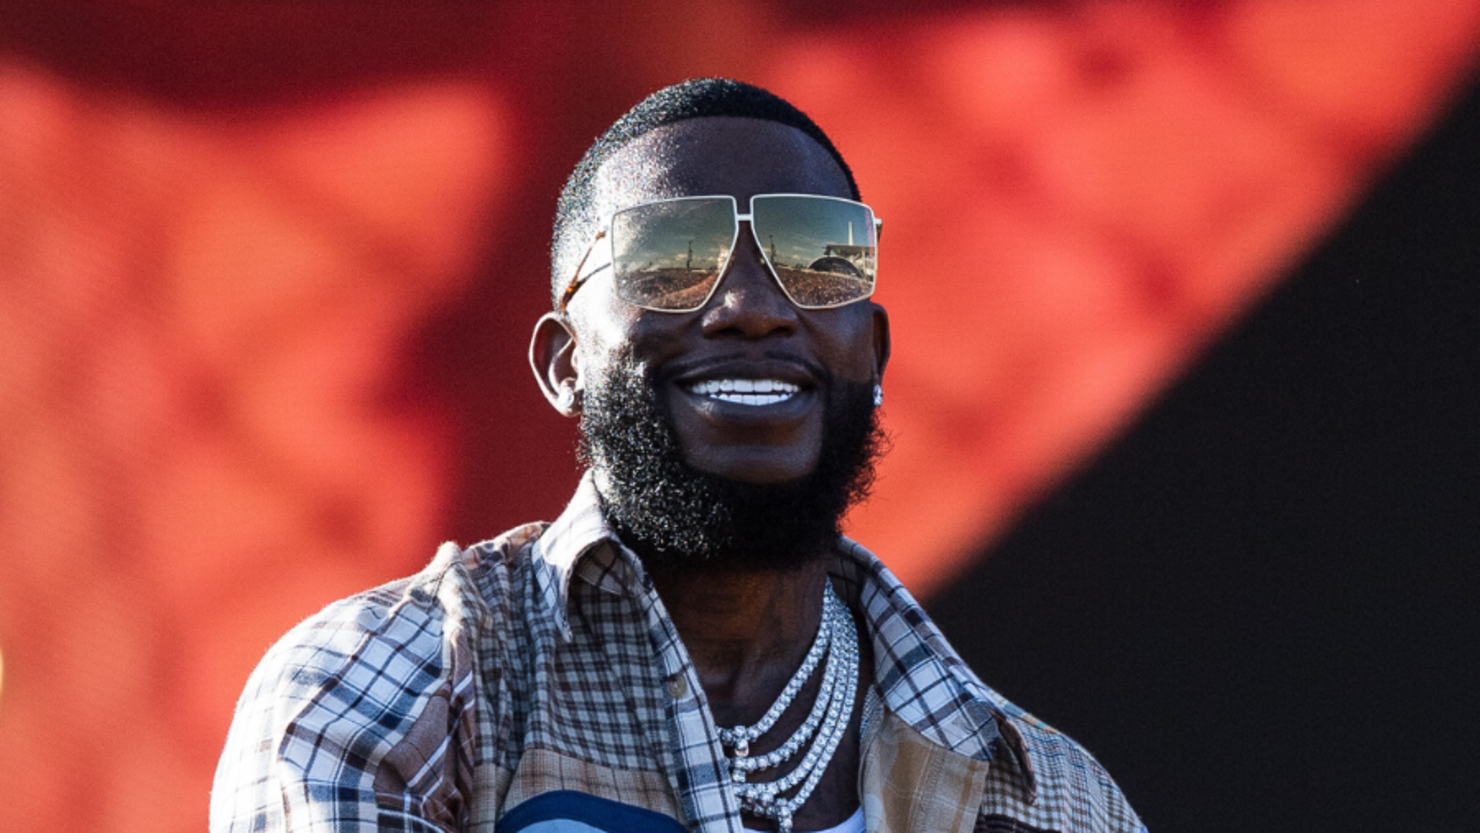 Gucci Mane Wants Artists To Stop 'Dissin' The Dead' In Their Music | iHeart